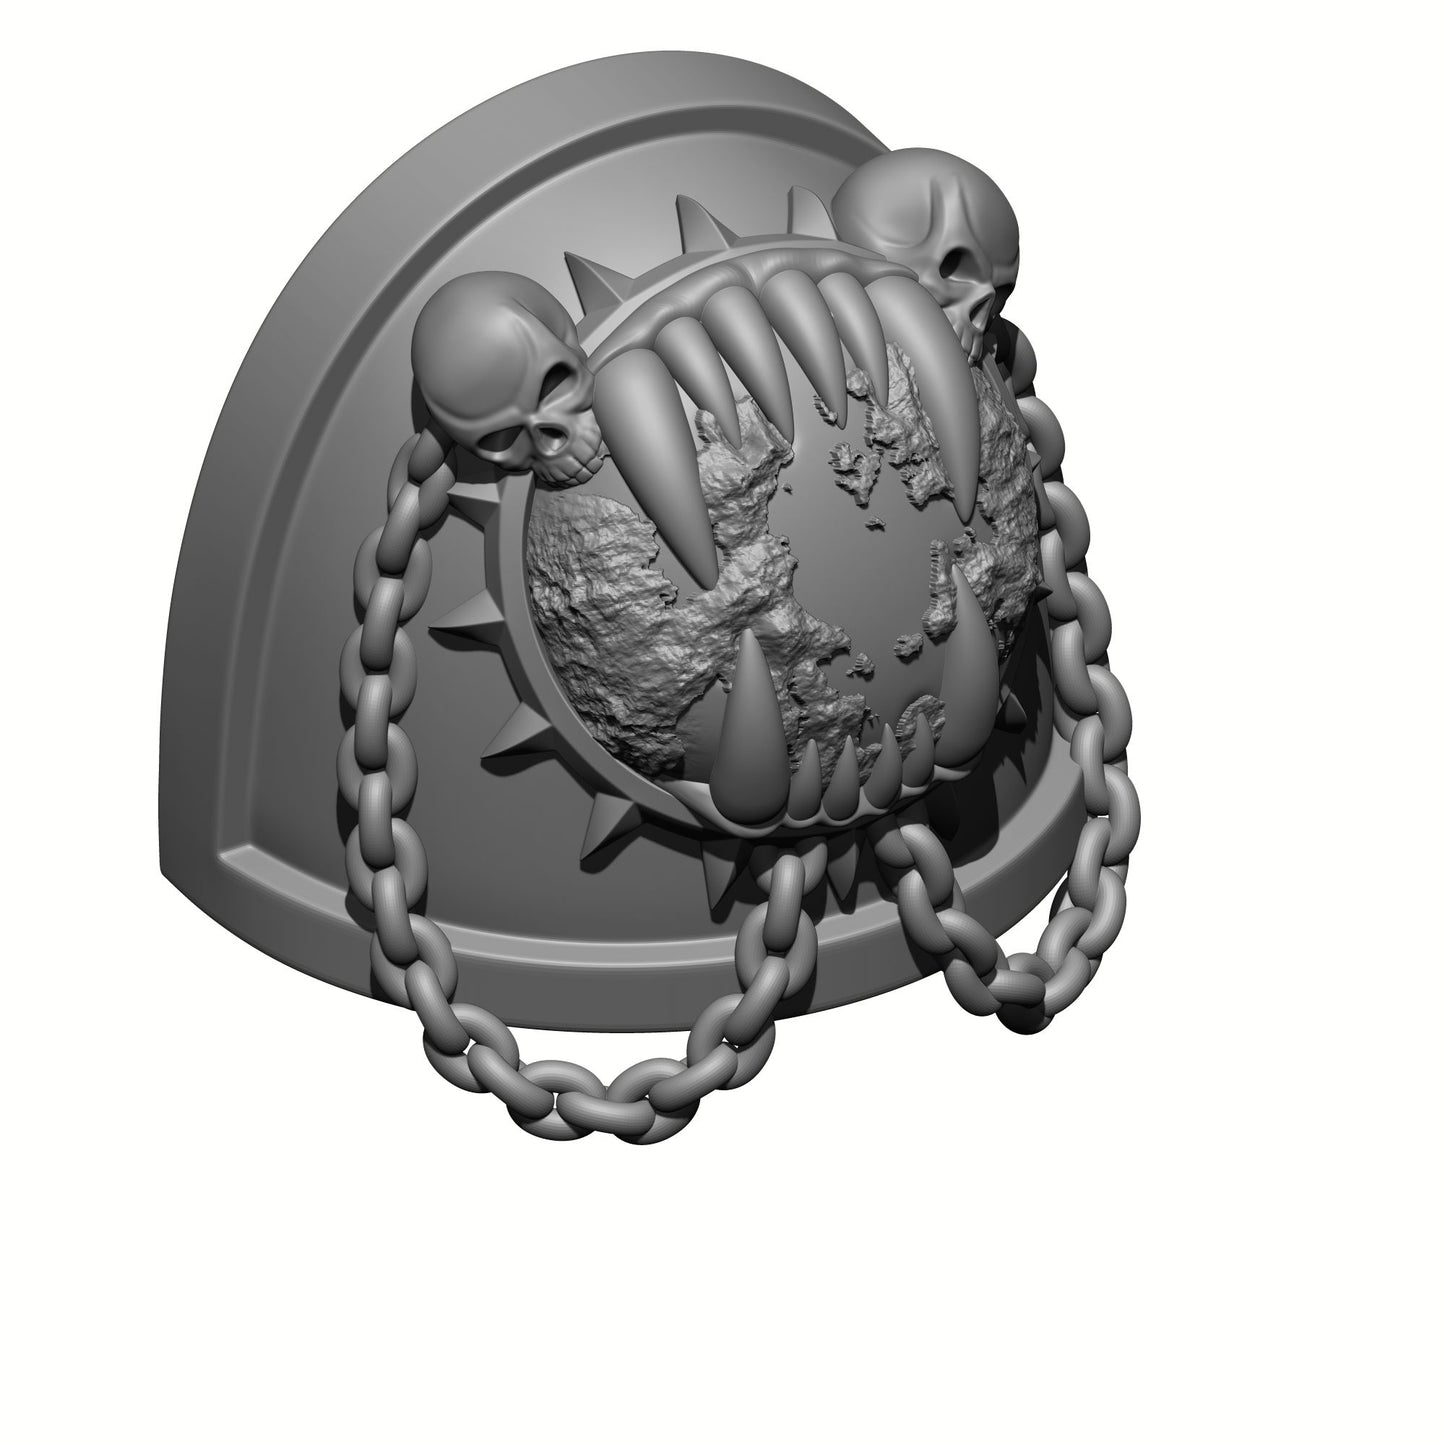 Custom World Eaters Chapter MKIV Shoulder Pad, with a Planet, Two Skulls and Chains designed by Fantasy World Games